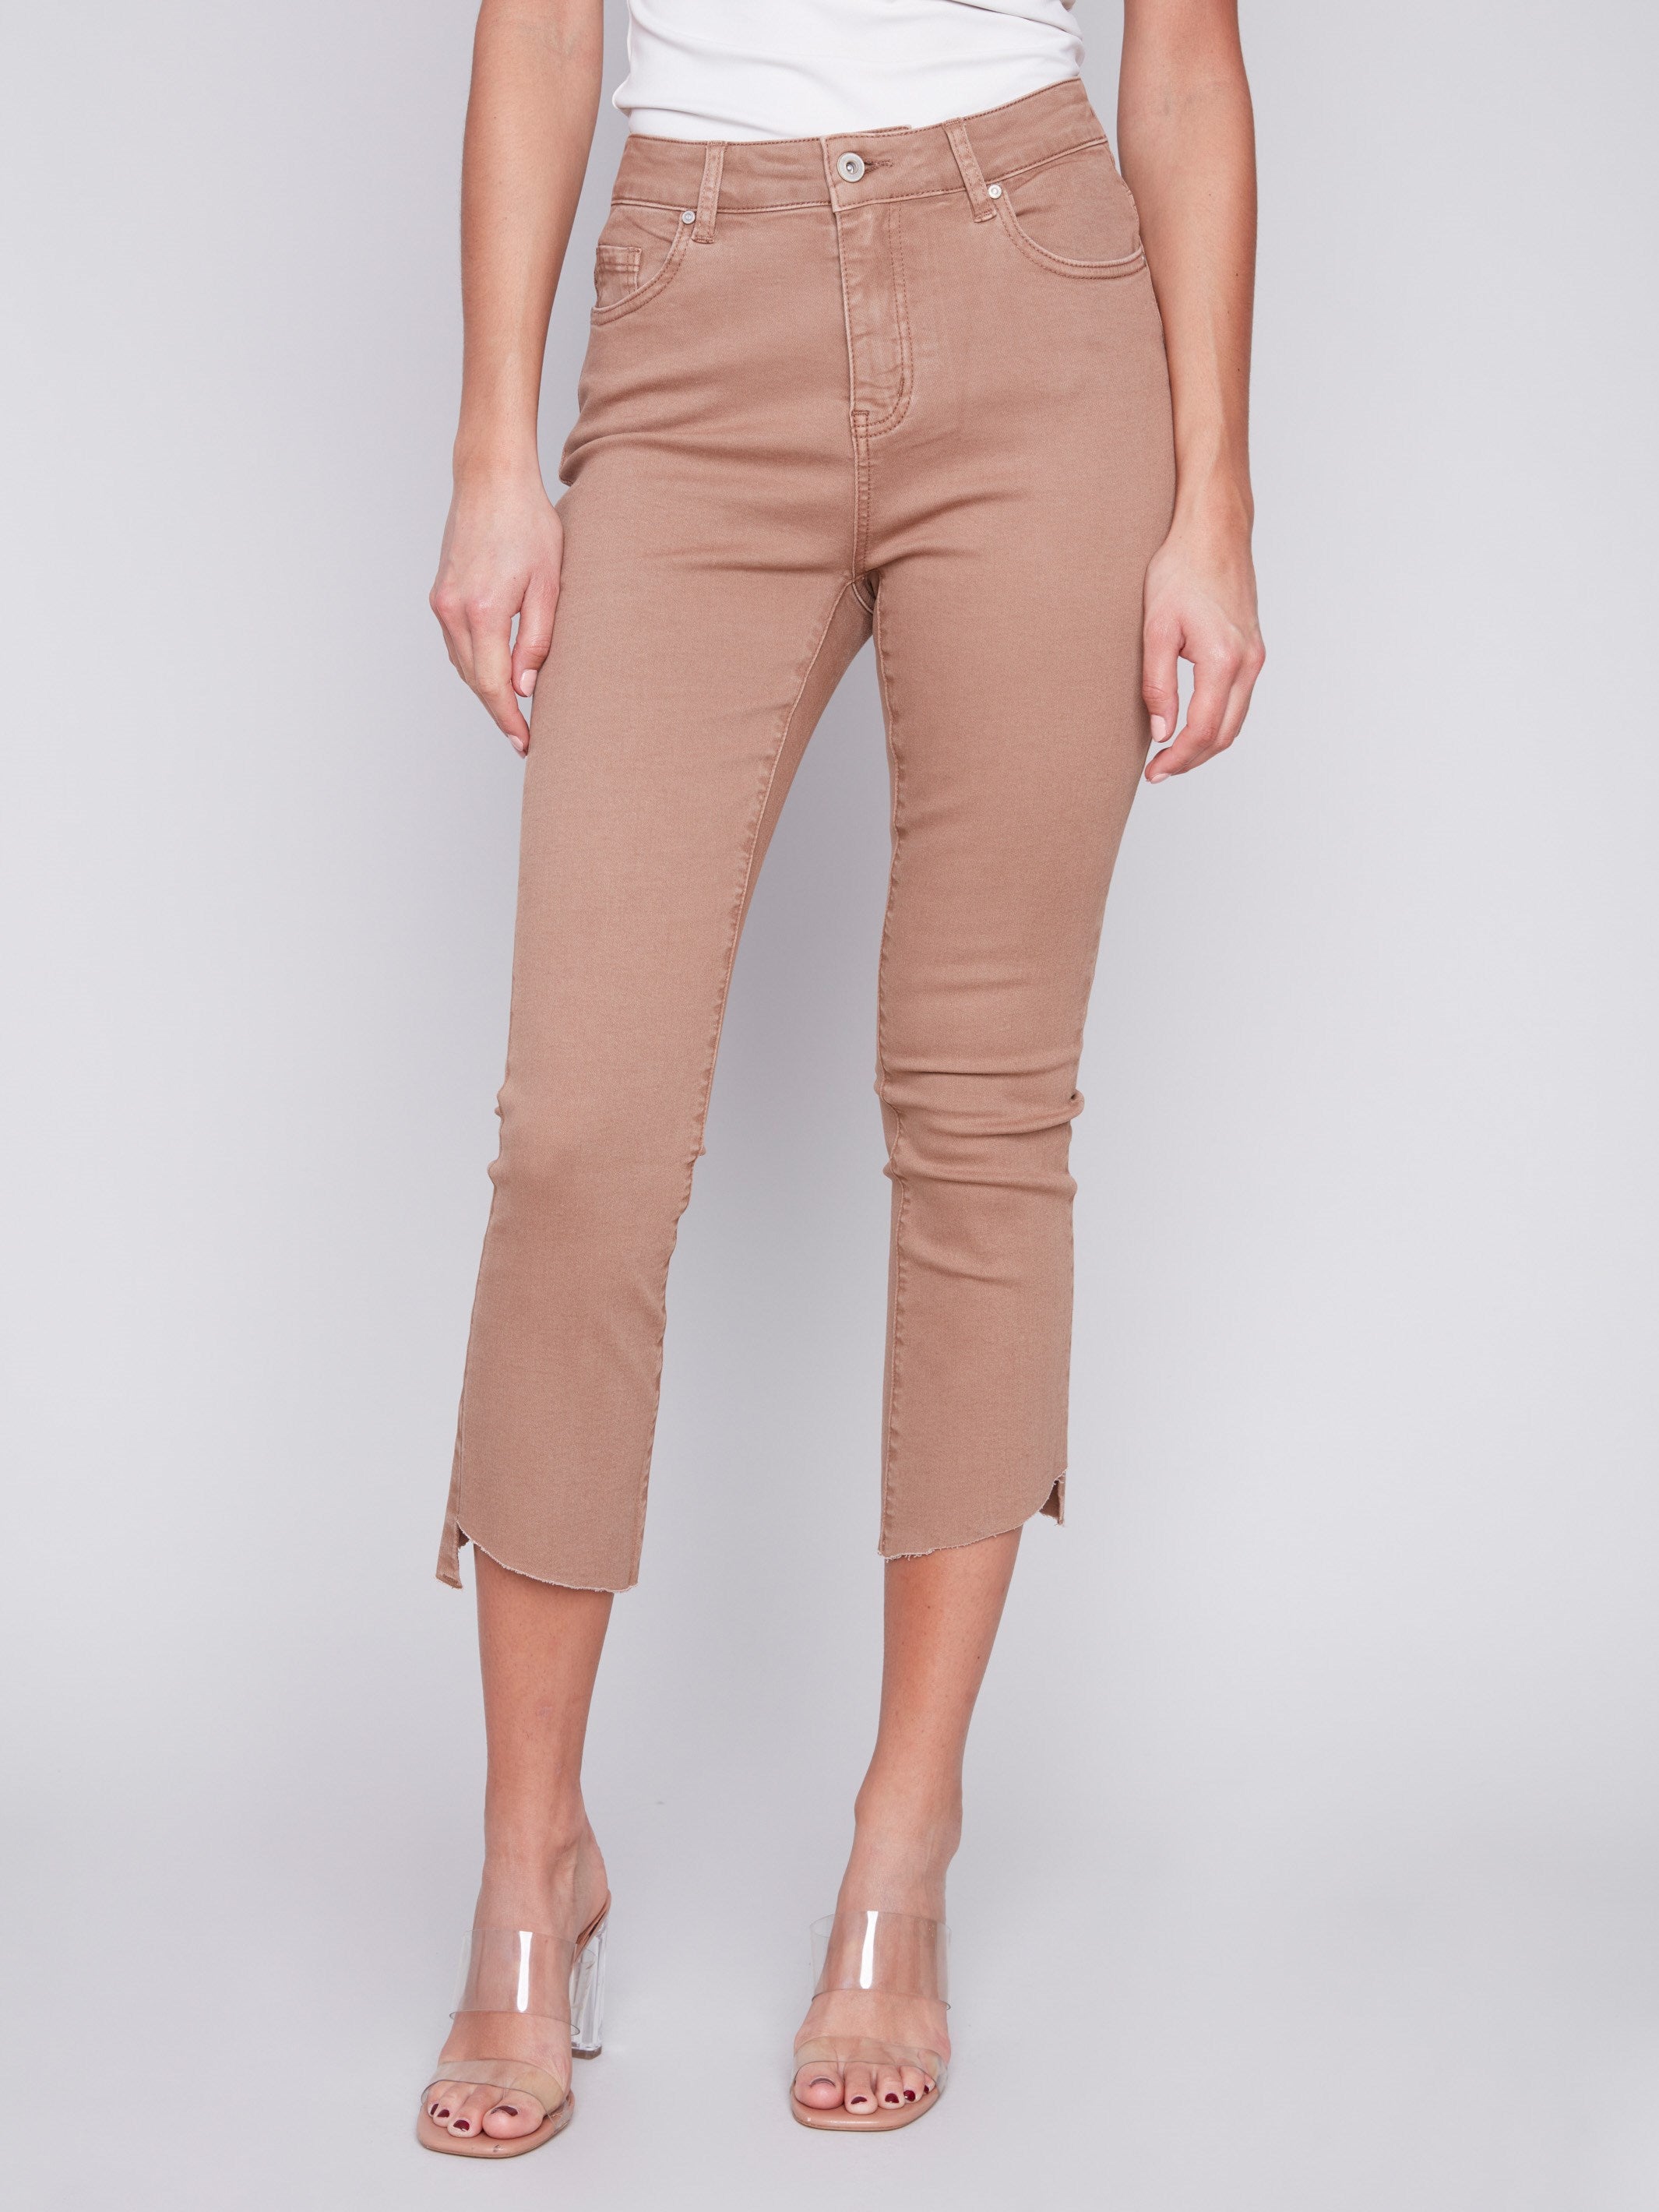 Cropped Bootcut Twill Pants with Asymmetrical Hem - Caramel - Charlie B Collection Canada - Image 2